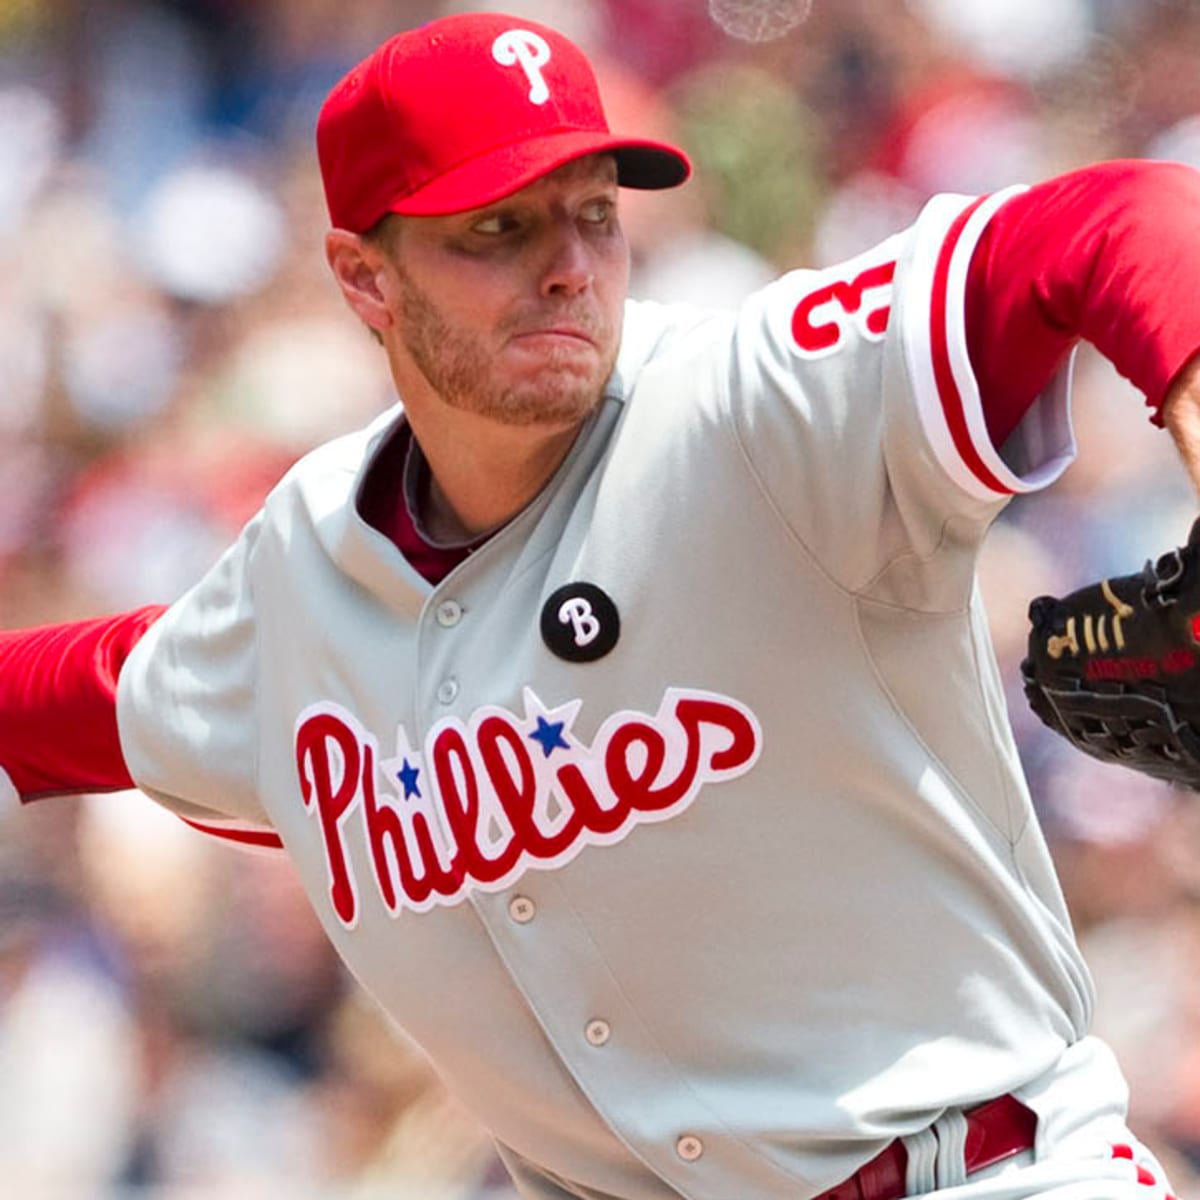 Roy Halladay Had Morphine In System When Plane Crashed: Autopsy